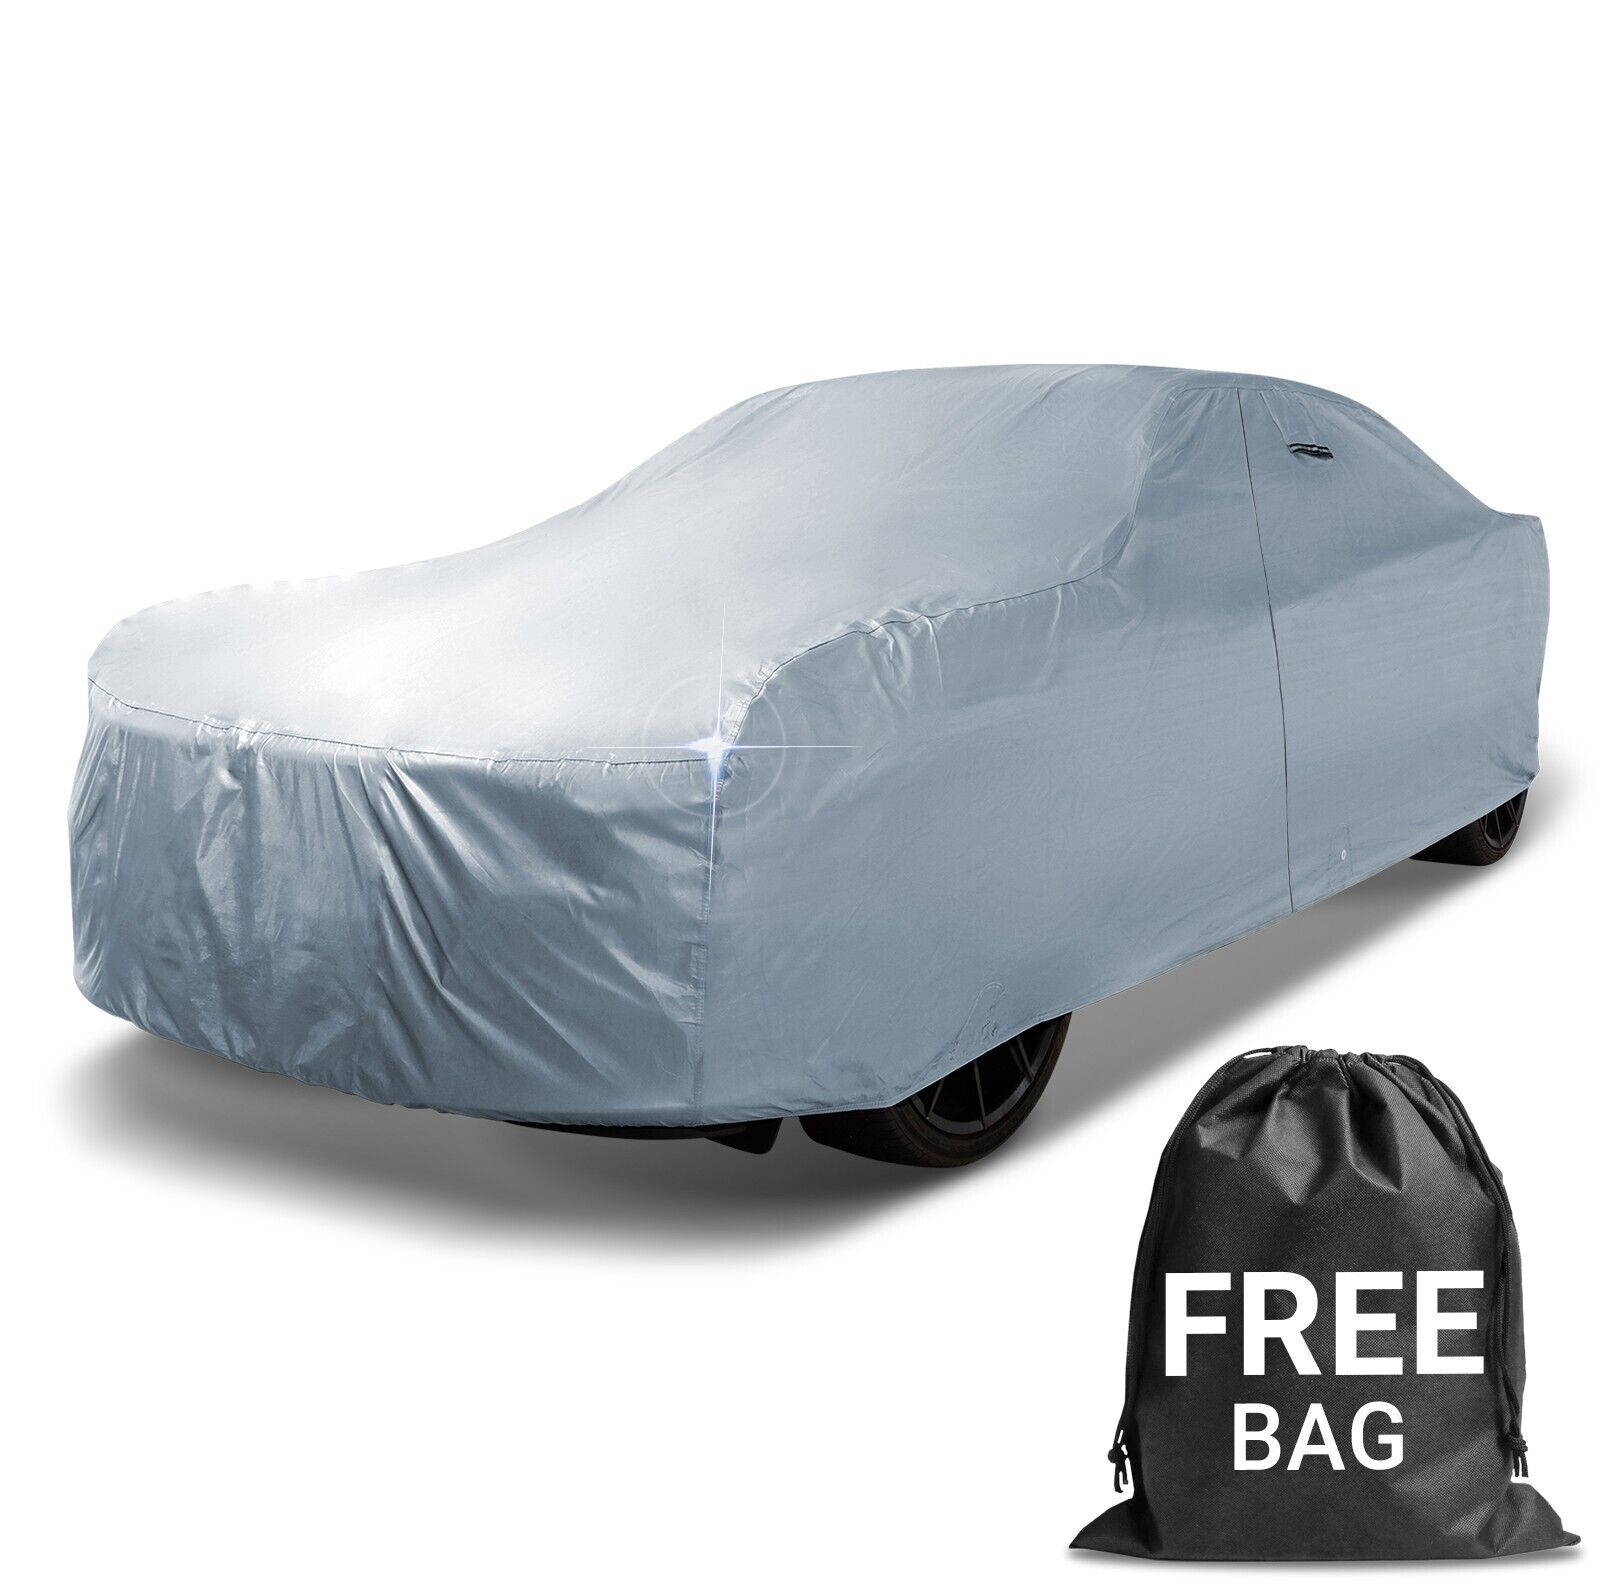 1960-1979 MG Midget Custom Car Cover - All-Weather Waterproof Outdoor Protection